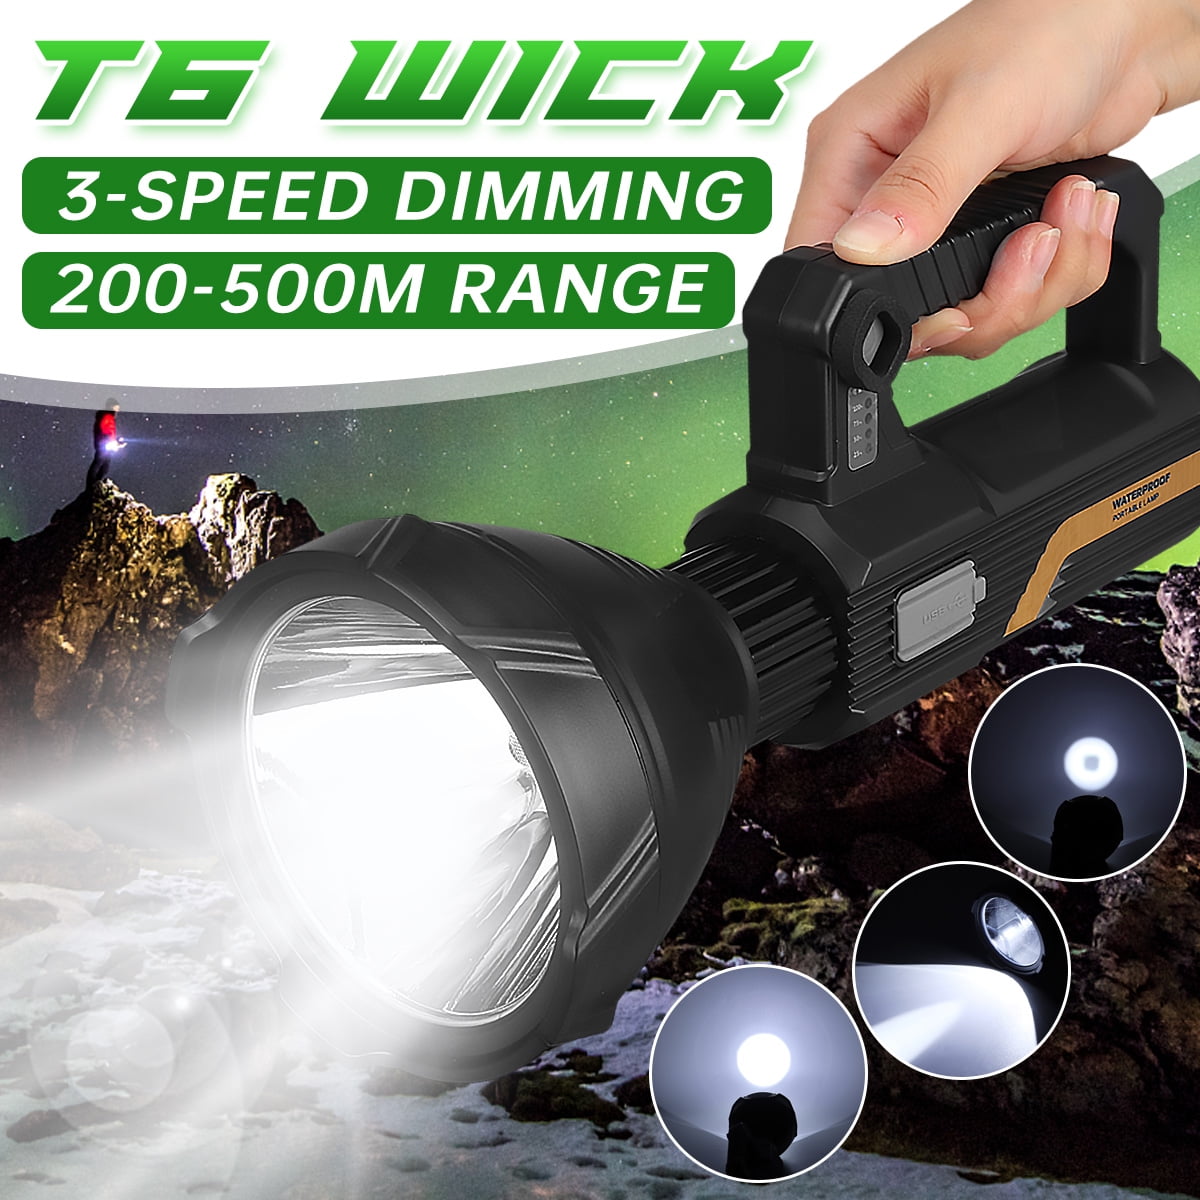 Rechargeable torch Hunting Handheld LED Spotlight portable Long Distance Shoot 